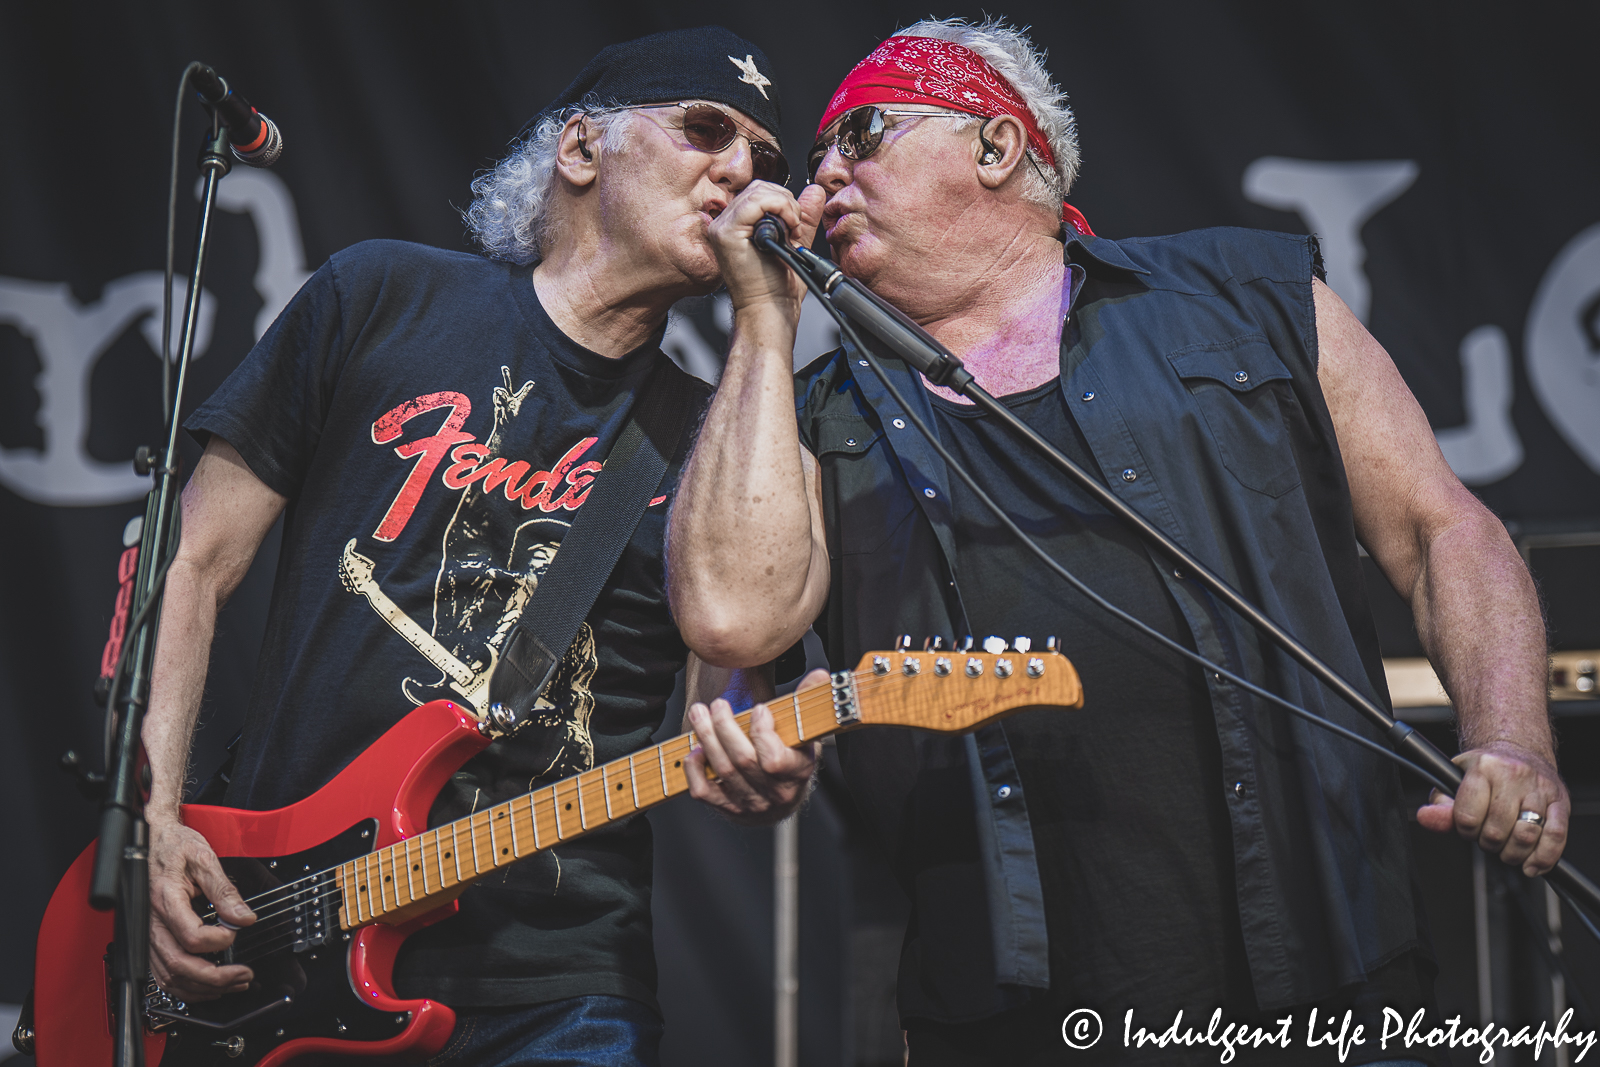 Loverboy guitar player Paul Dean and frontman Mike Reno performing live together at Starlight Theatre in Kansas City, MO on June 14, 2022.